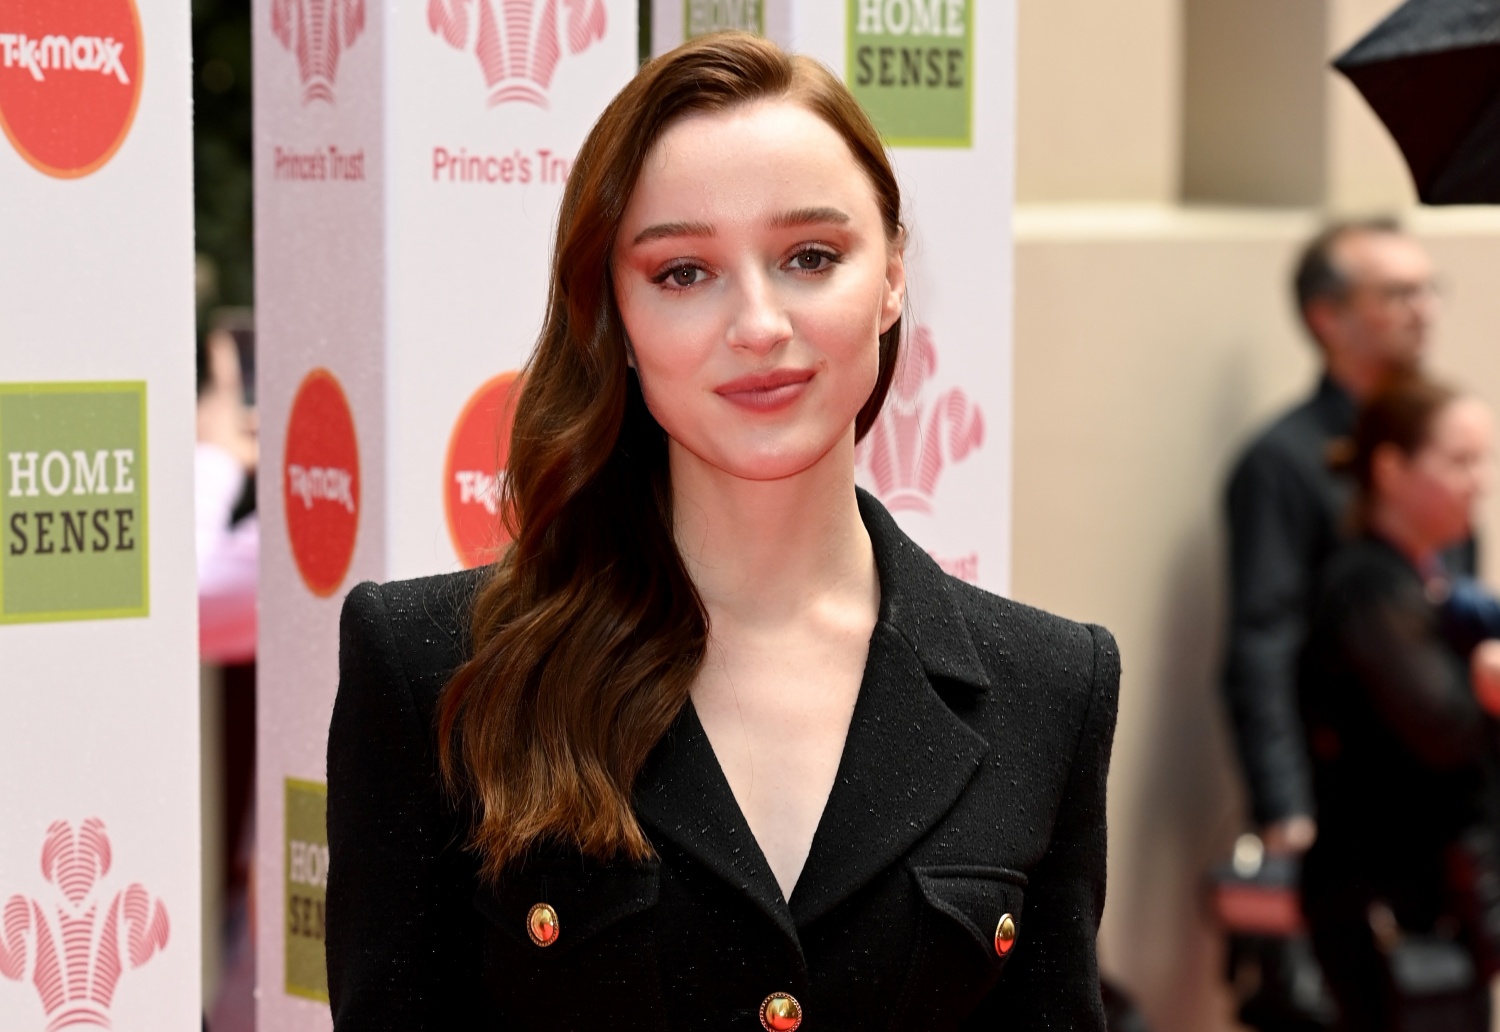 The Prince's Trust Awards 2022 - Arrivals